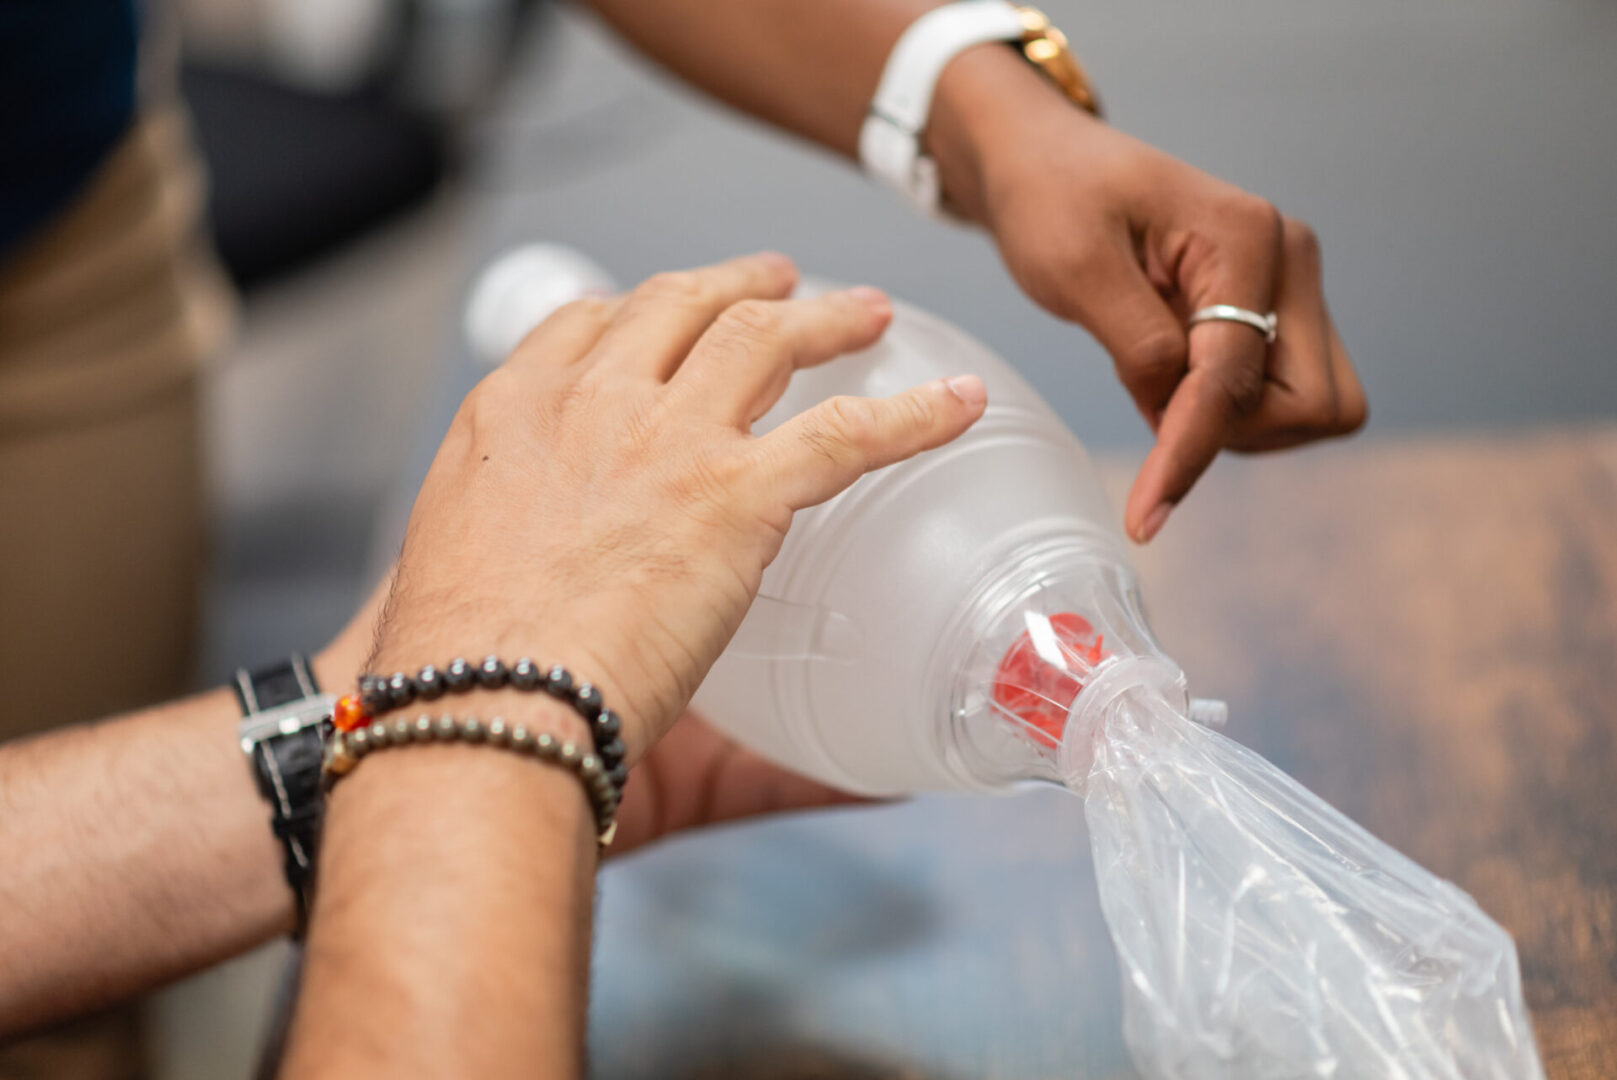 A person is pouring water into a plastic bottle.